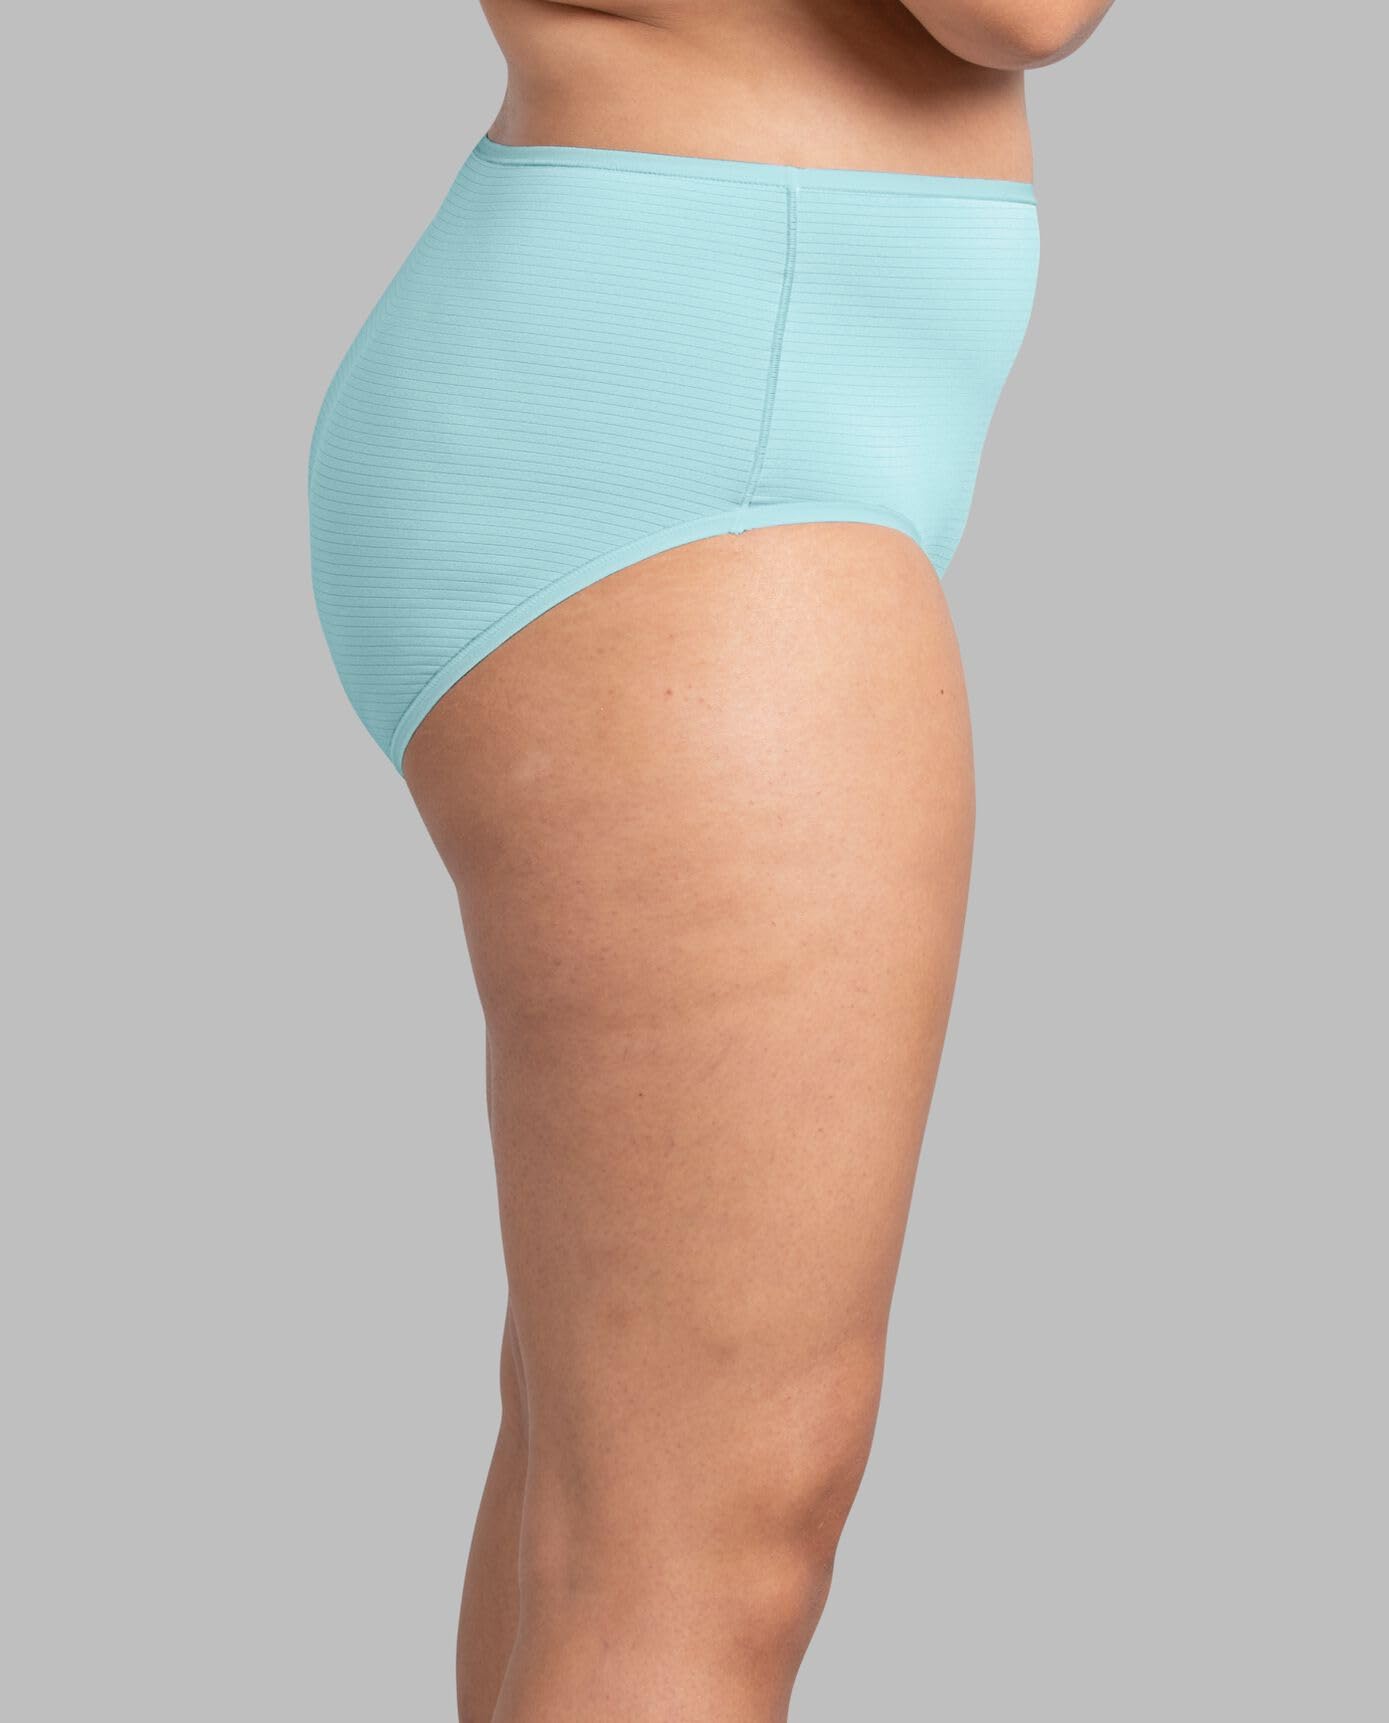 Fruit of the Loom Women's Breathable Underwear, Moisture Wicking Keeps You Cool & Comfortable, Available in Plus Size